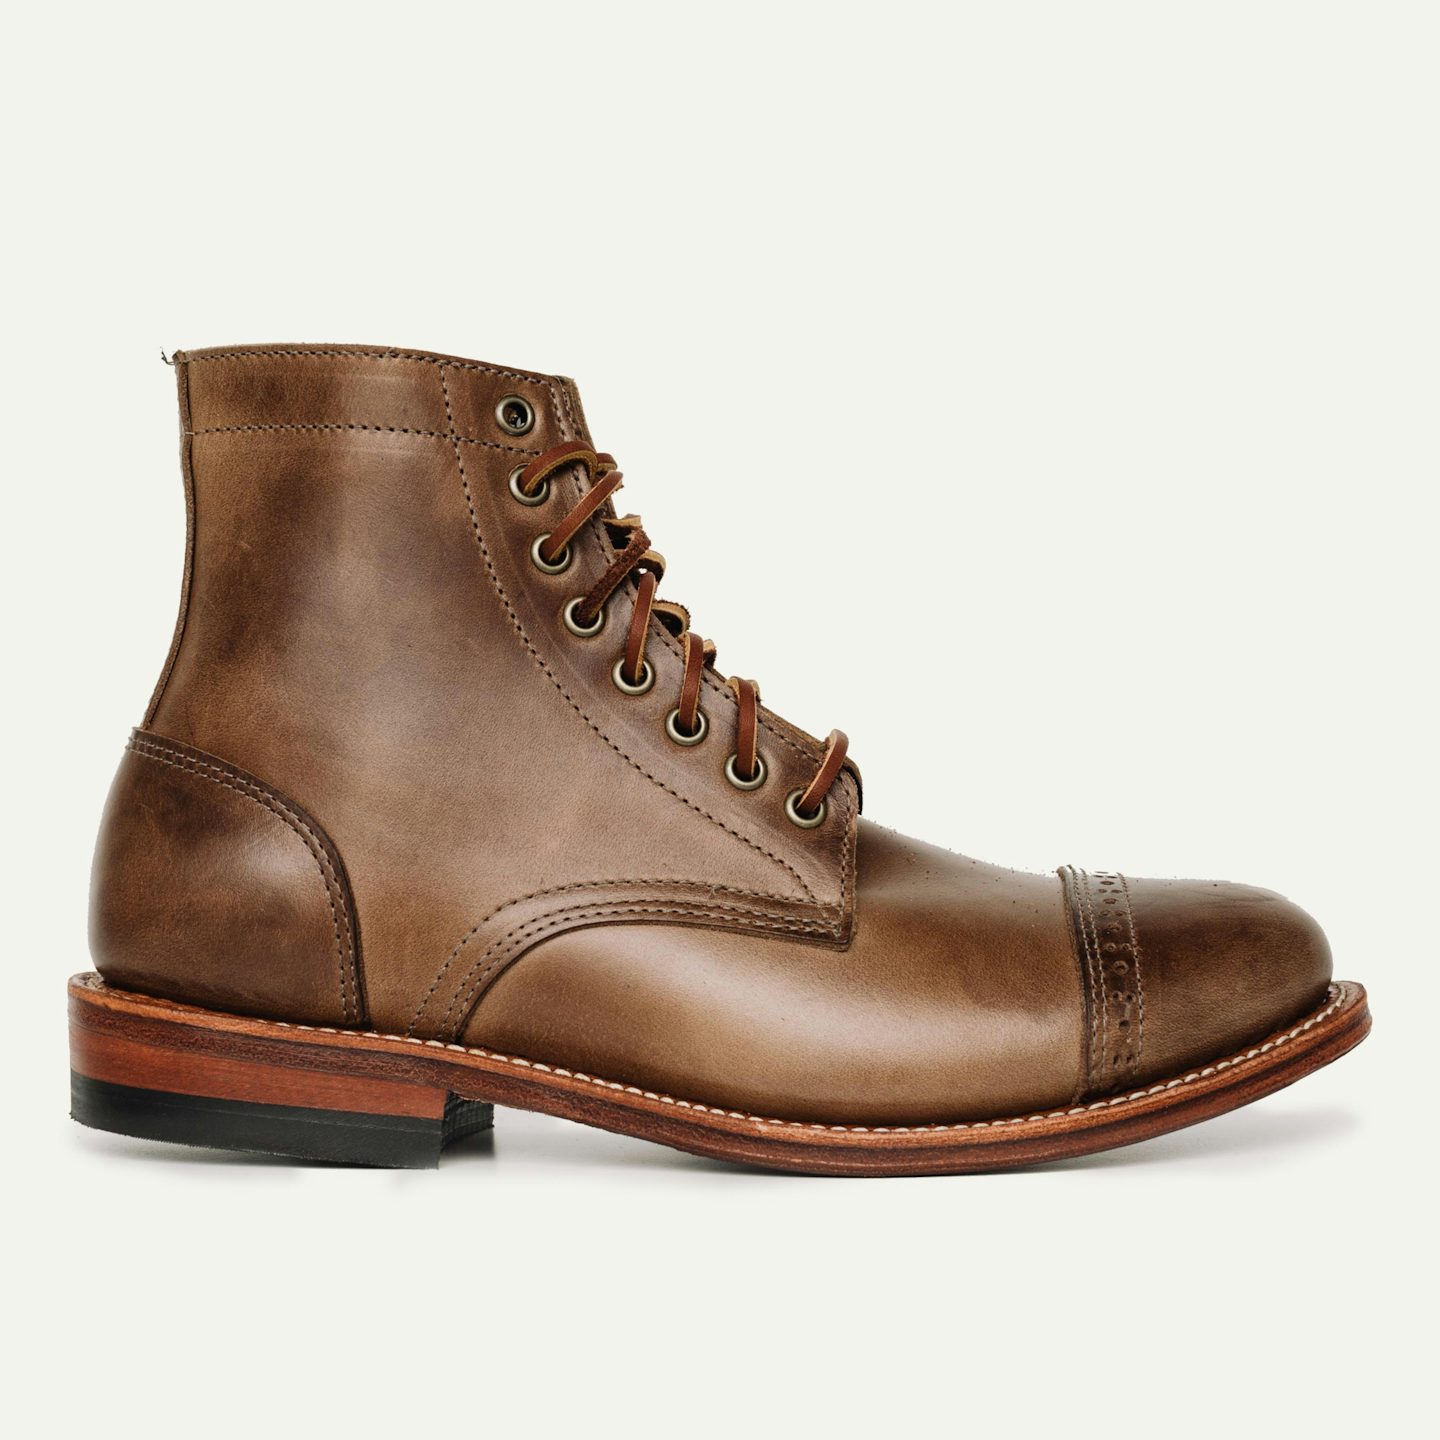 cap toe boots meaning